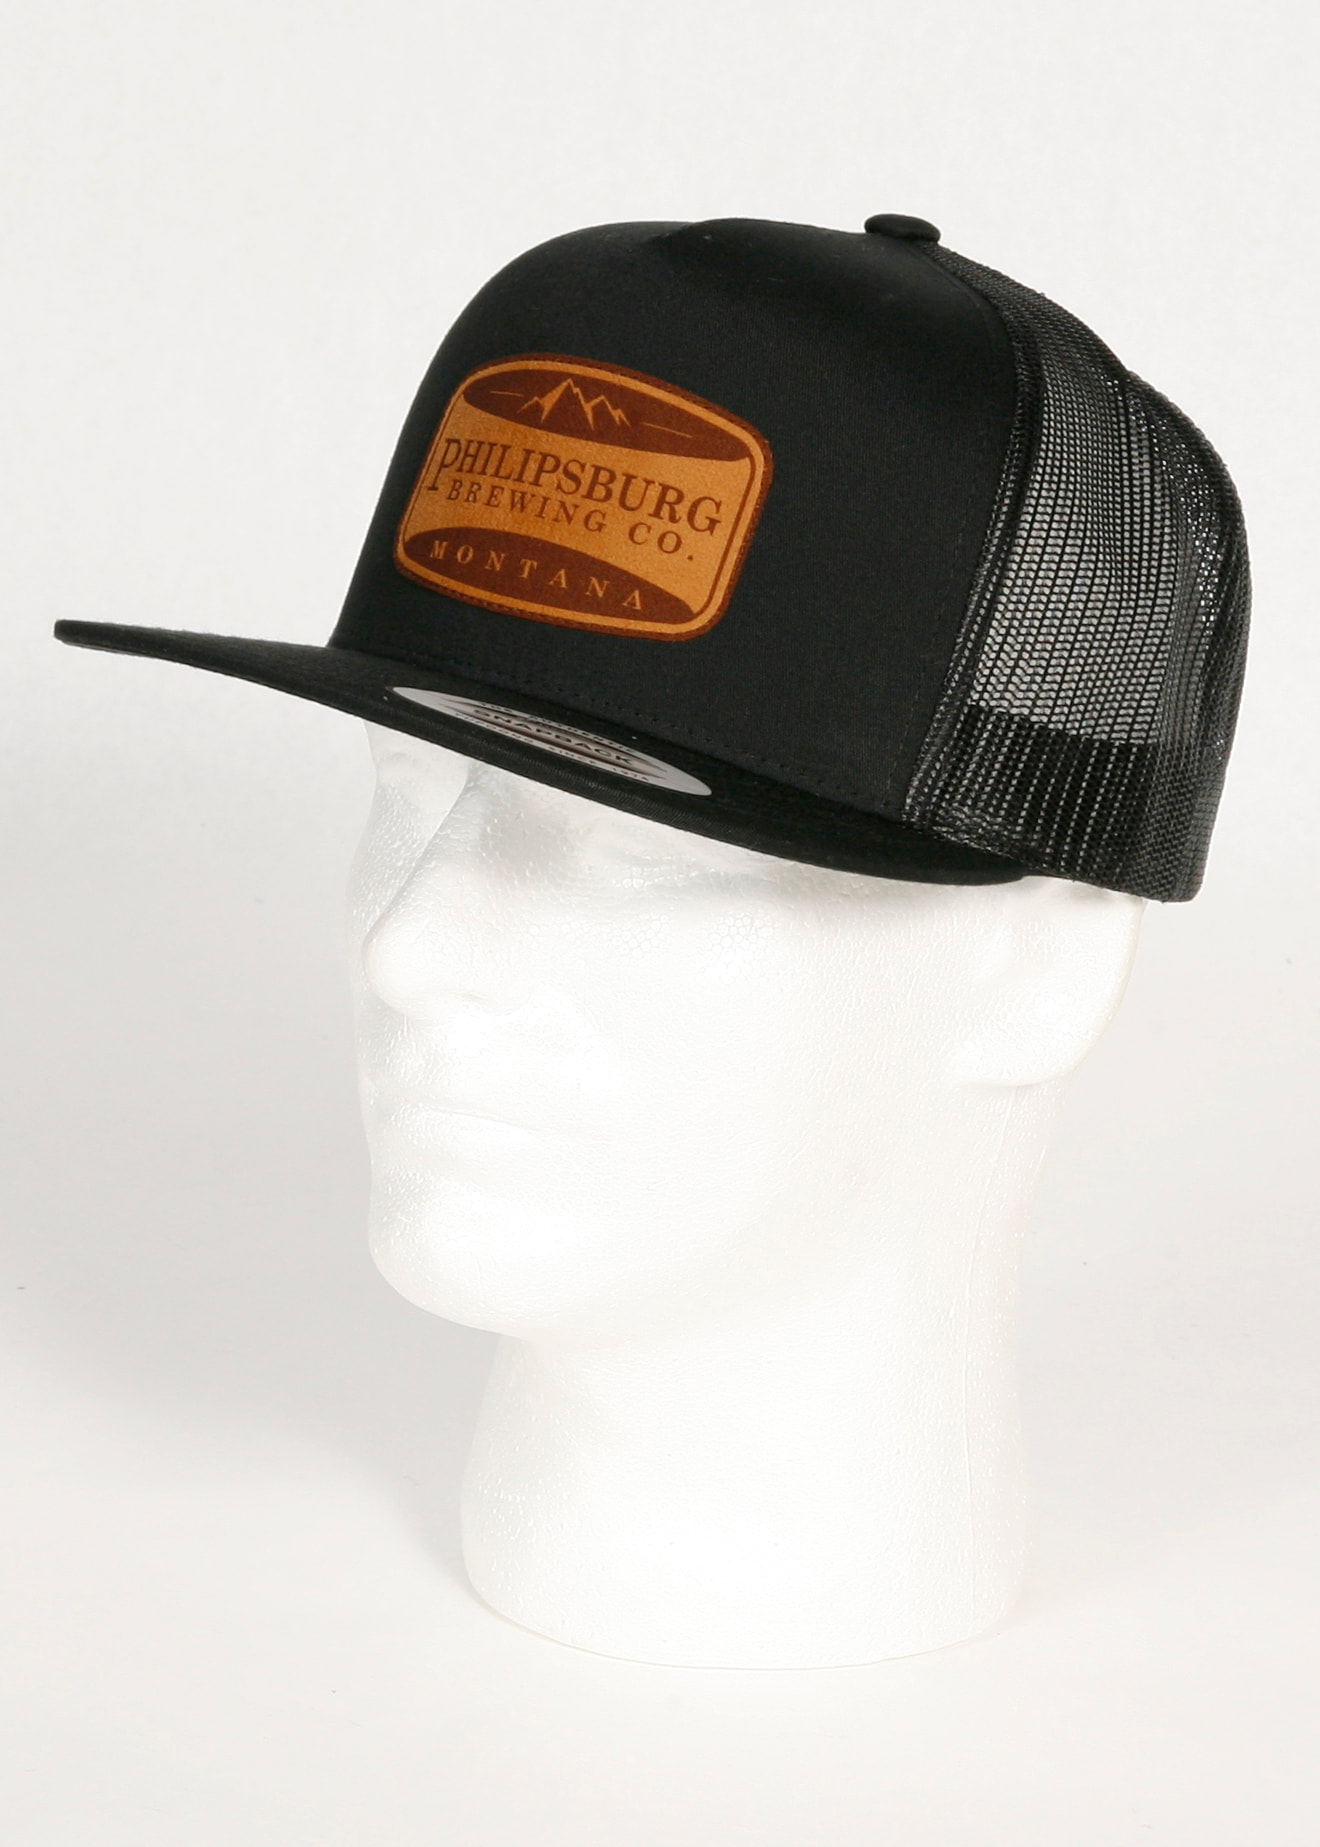 Philipsburg Brewing Company Flexfit Trucker Patch with Suede